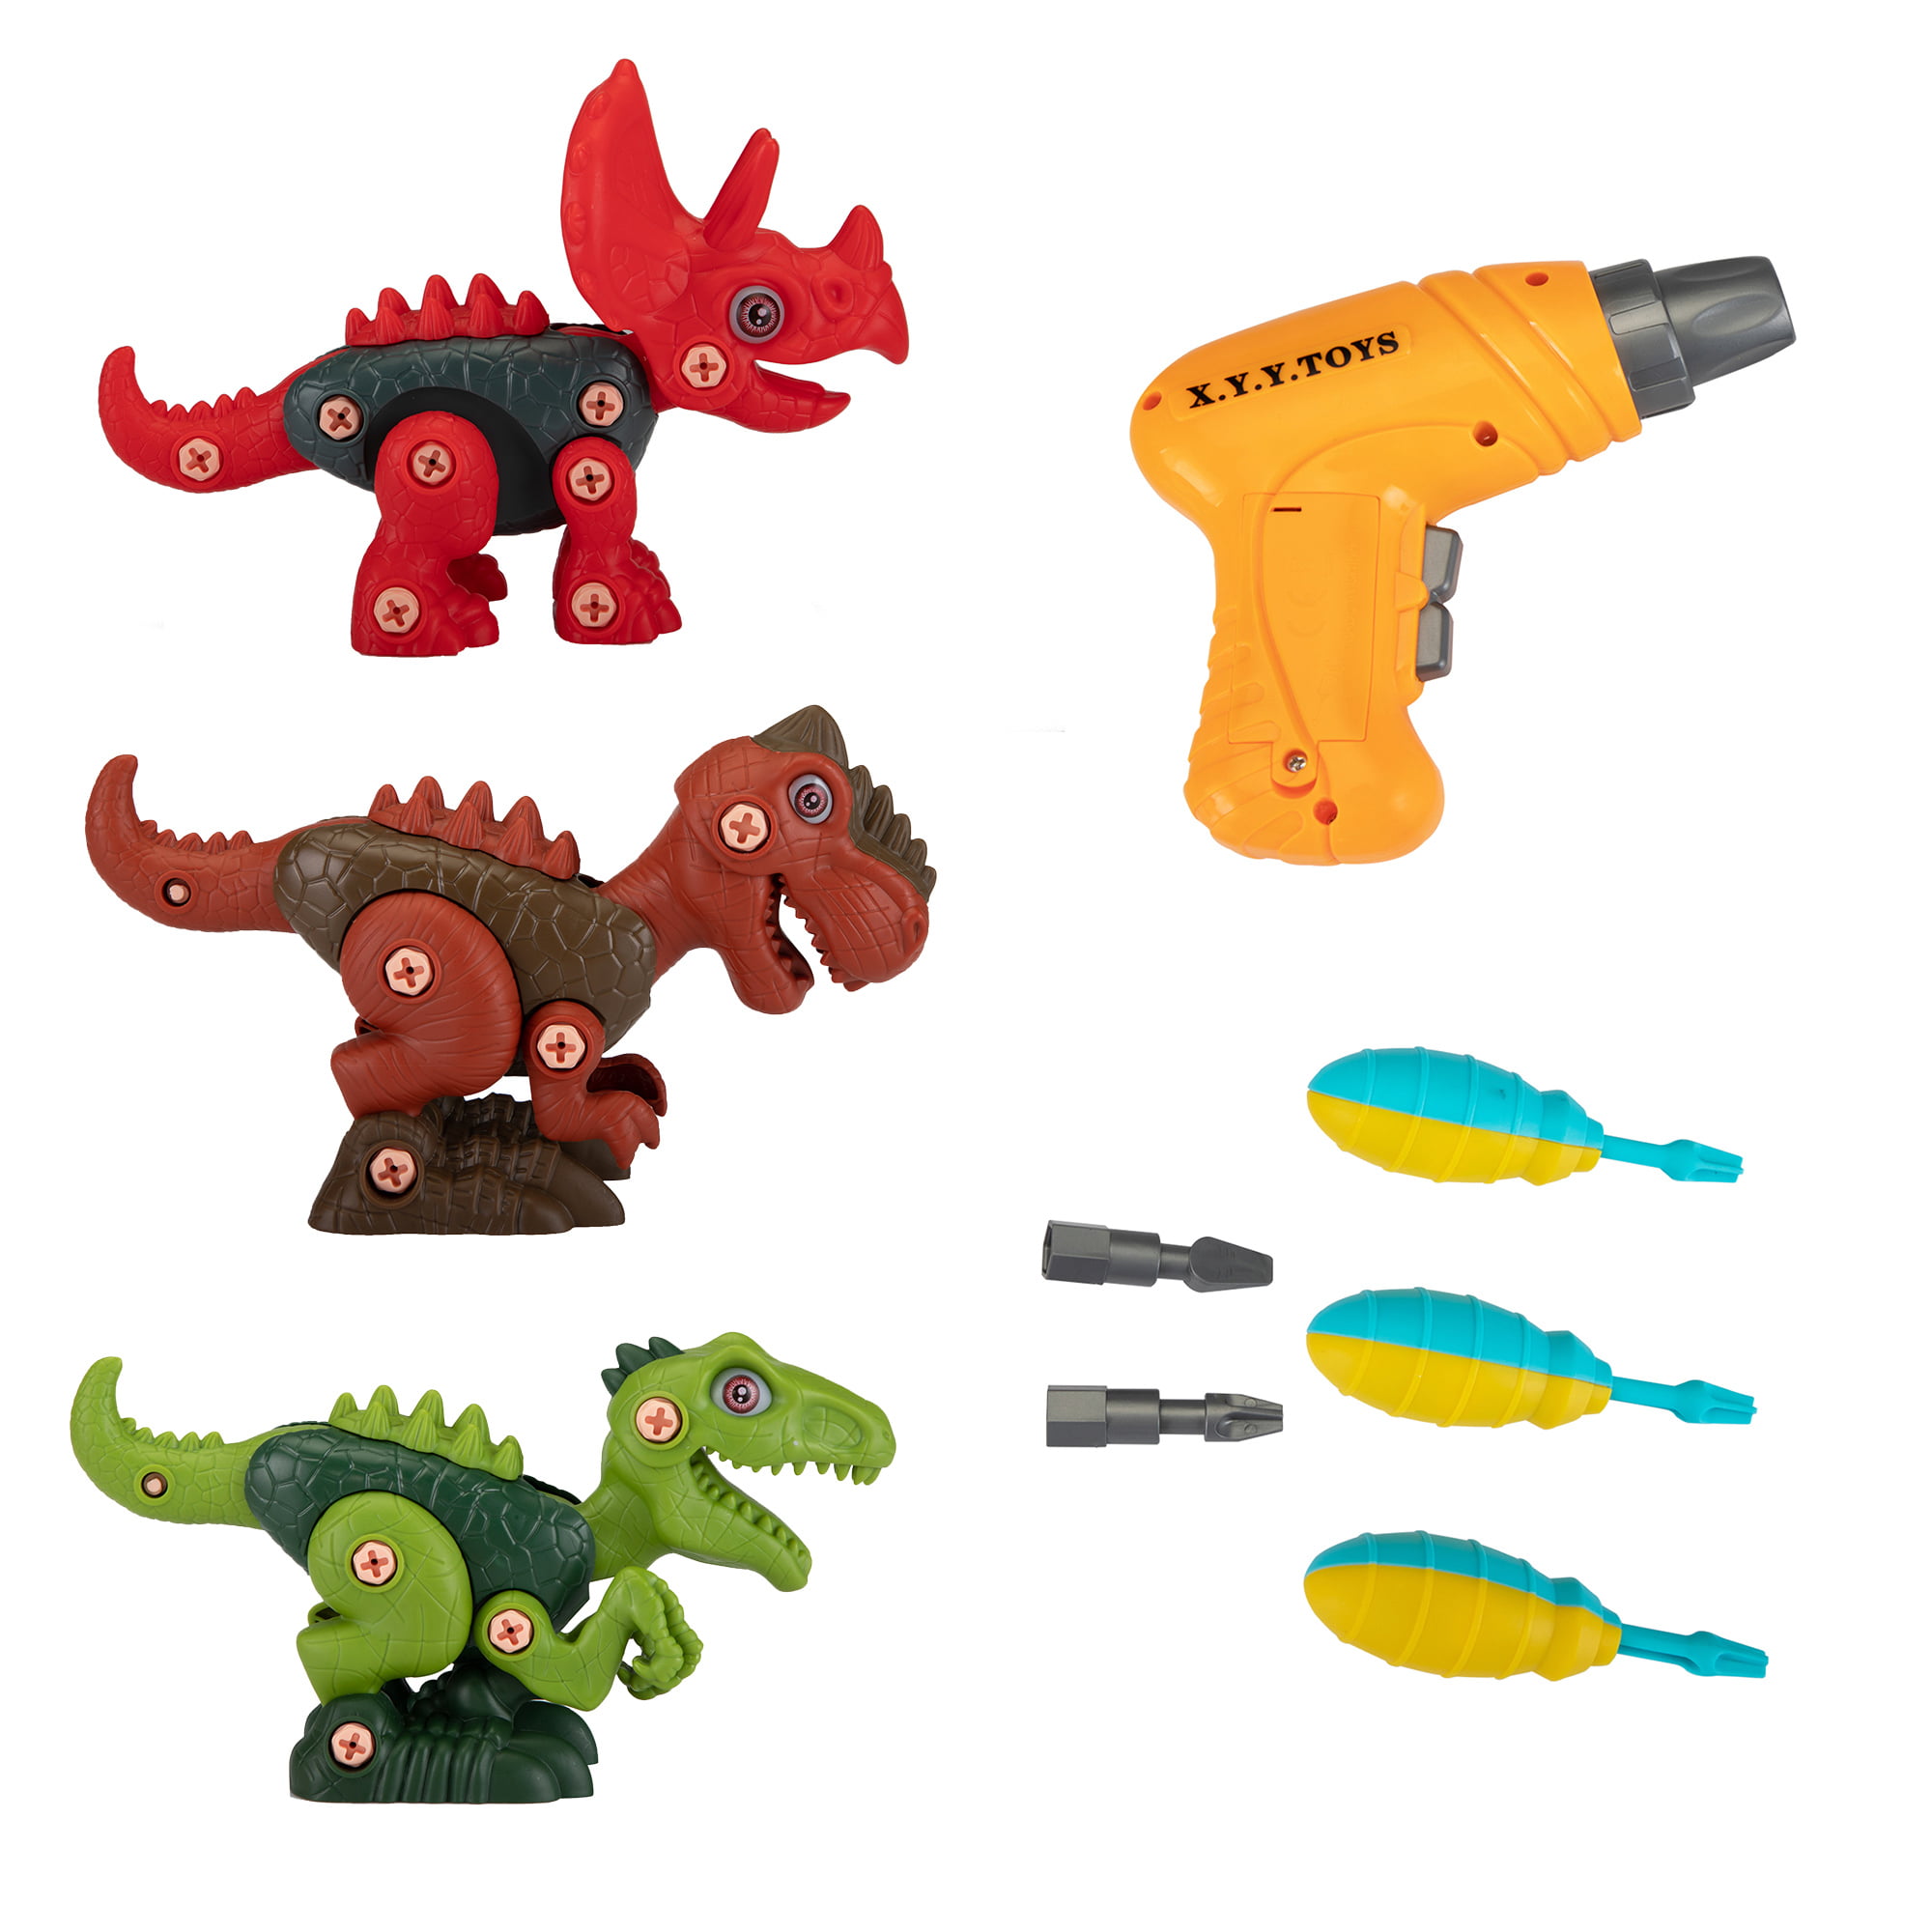 Veryke Educational Take Apart Dinosaur Toy Set with Electric Drill, Stem Learning Gifts for Kids